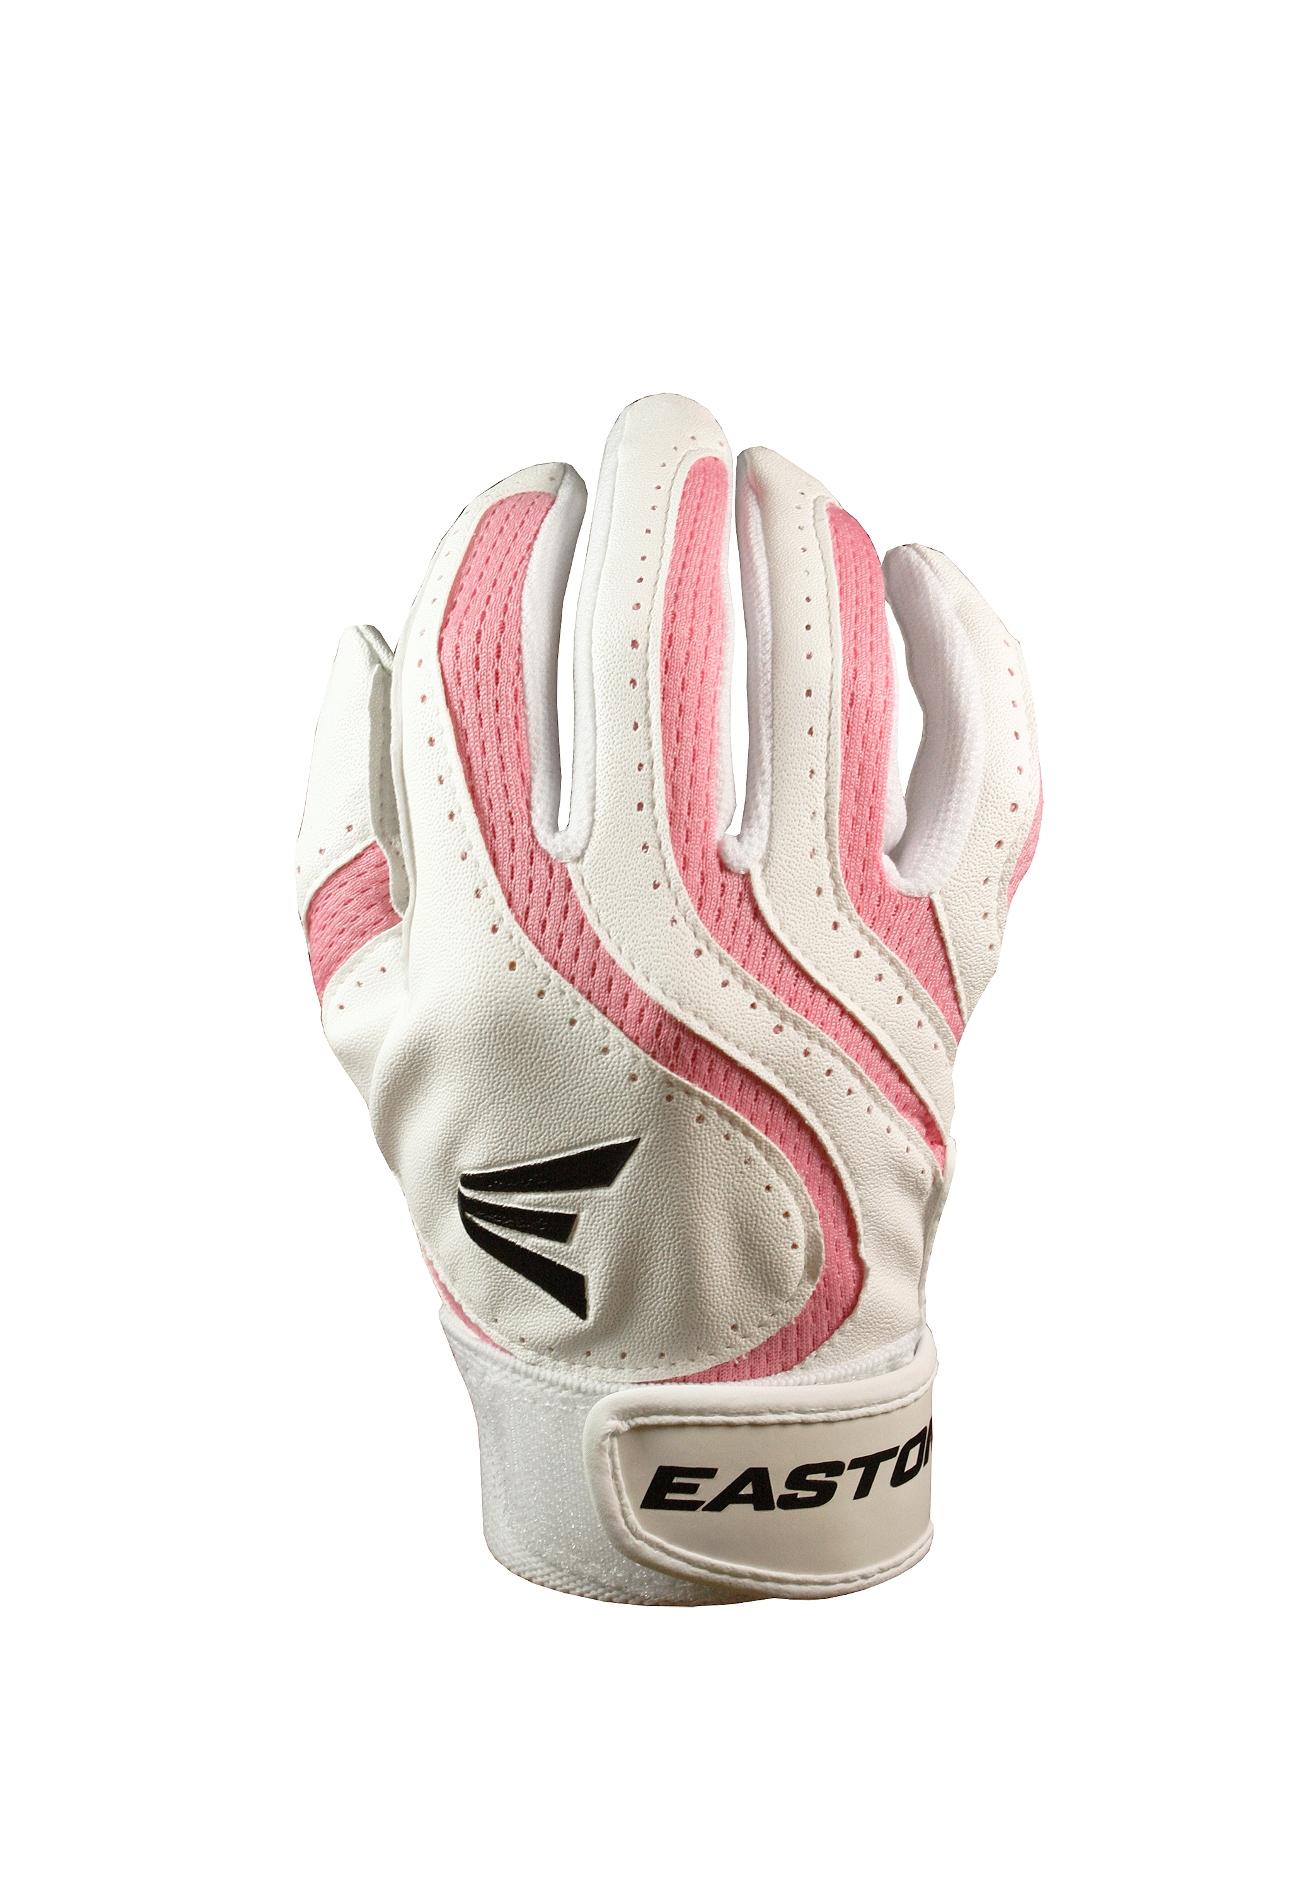 Easton Magnum Batting Glove - Youth Size S - Pink